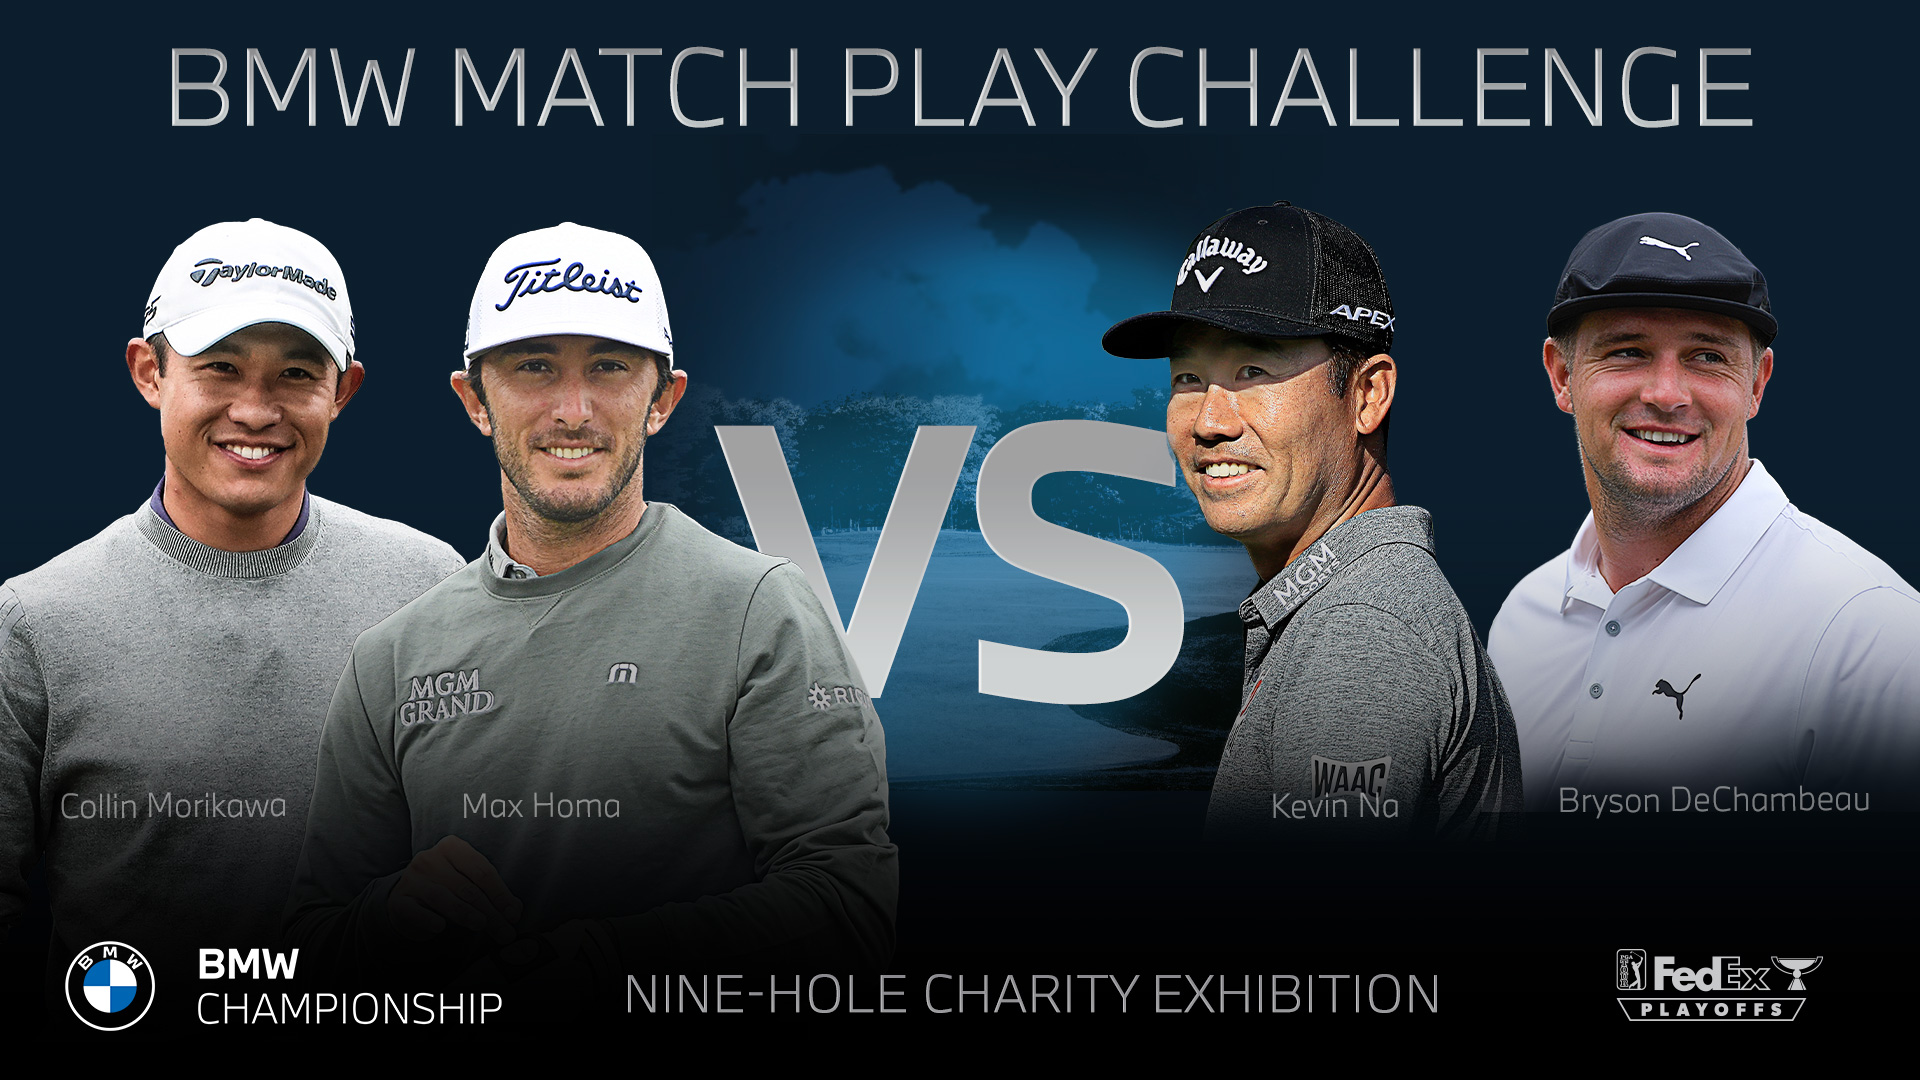 BMW Championship to host charity match with PGA TOUR stars BMW